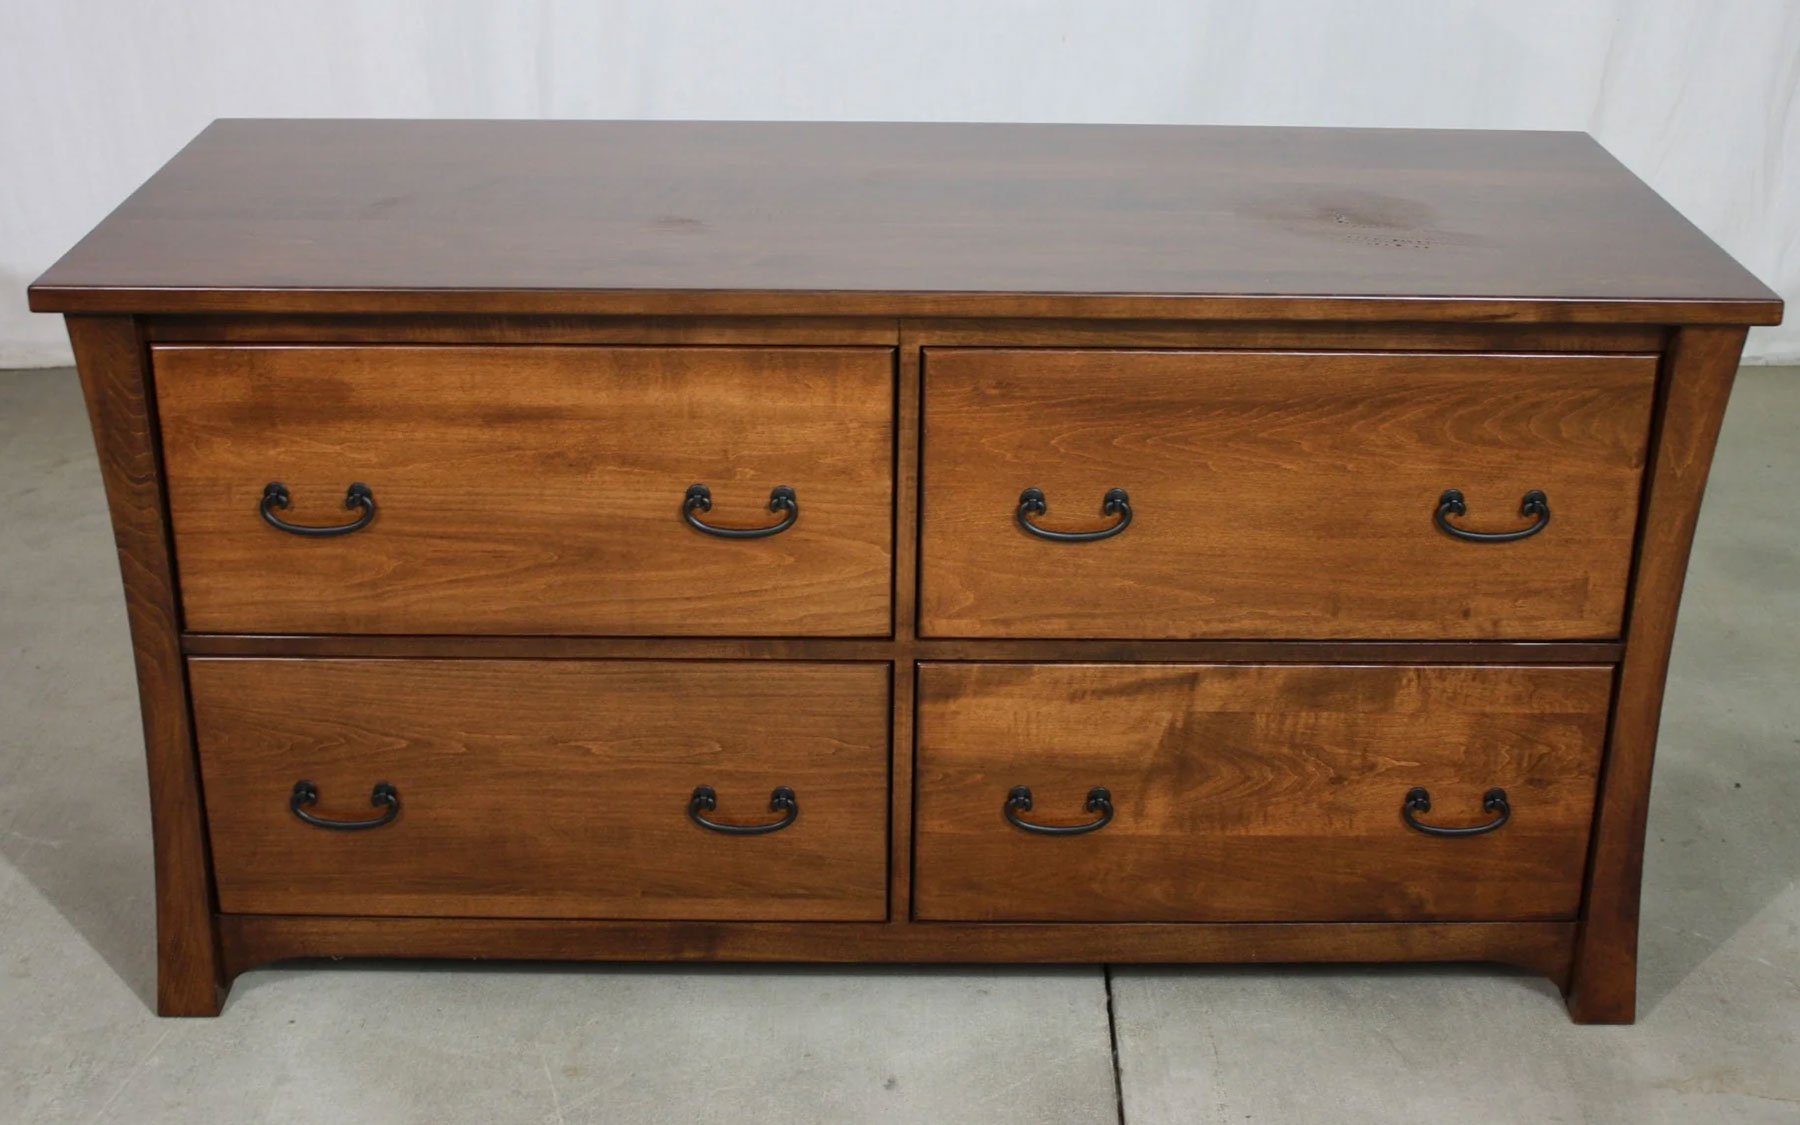 Woodbury File Credenza in Brown Maple